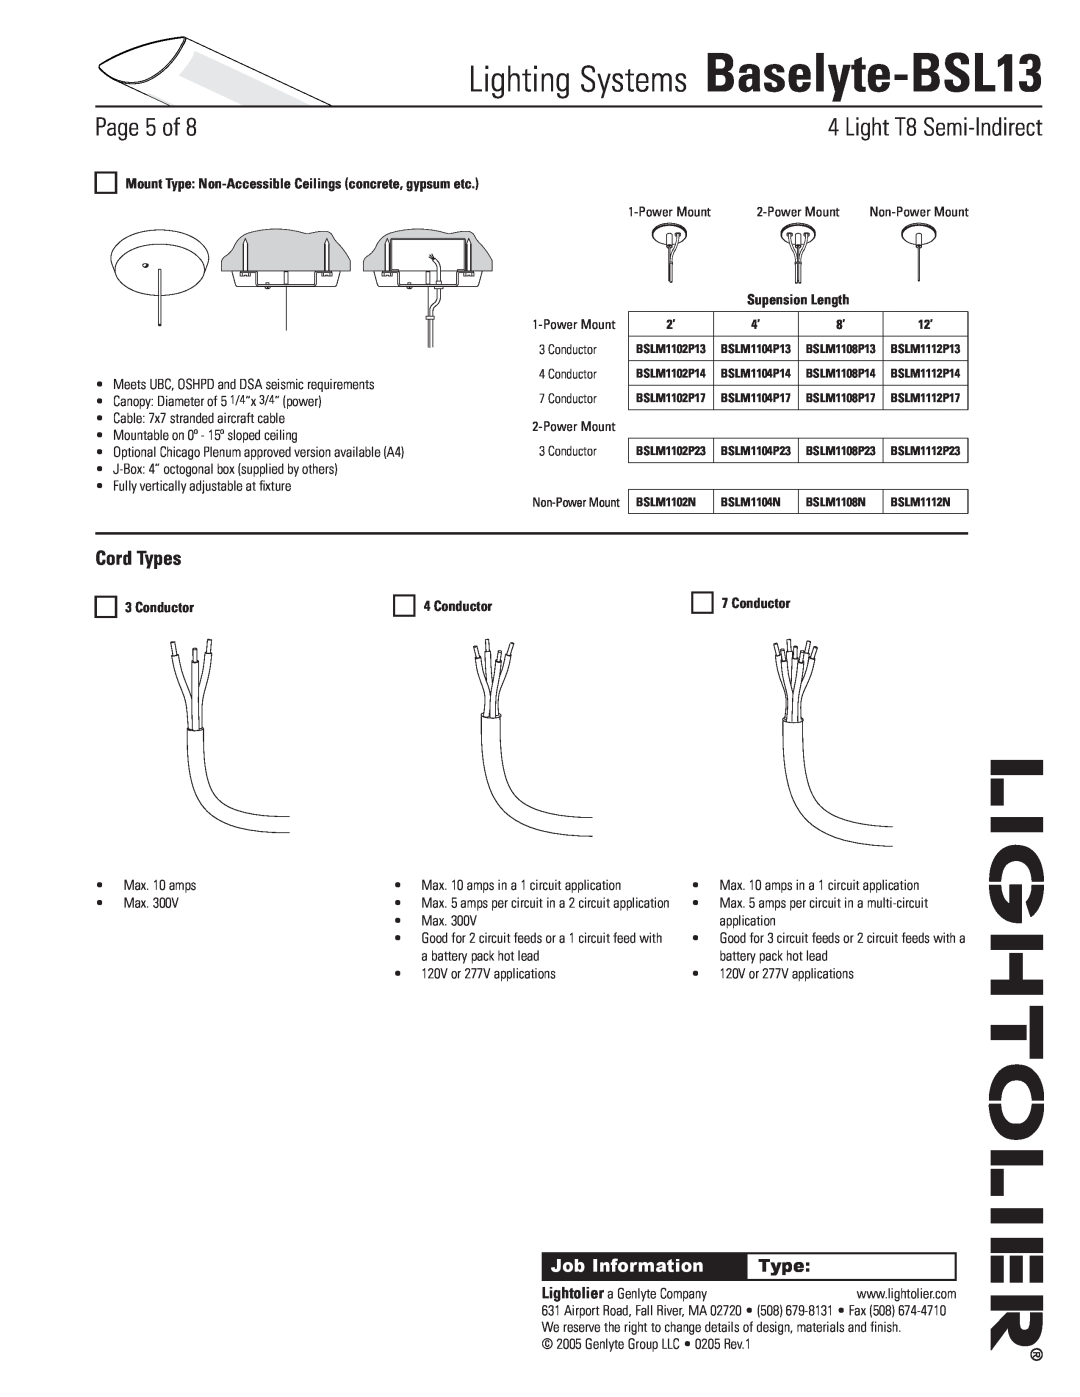 Lightolier Cord Types, Conductor, Lighting Systems Baselyte-BSL13, Page of, Light T8 Semi-Indirect, Job Information 